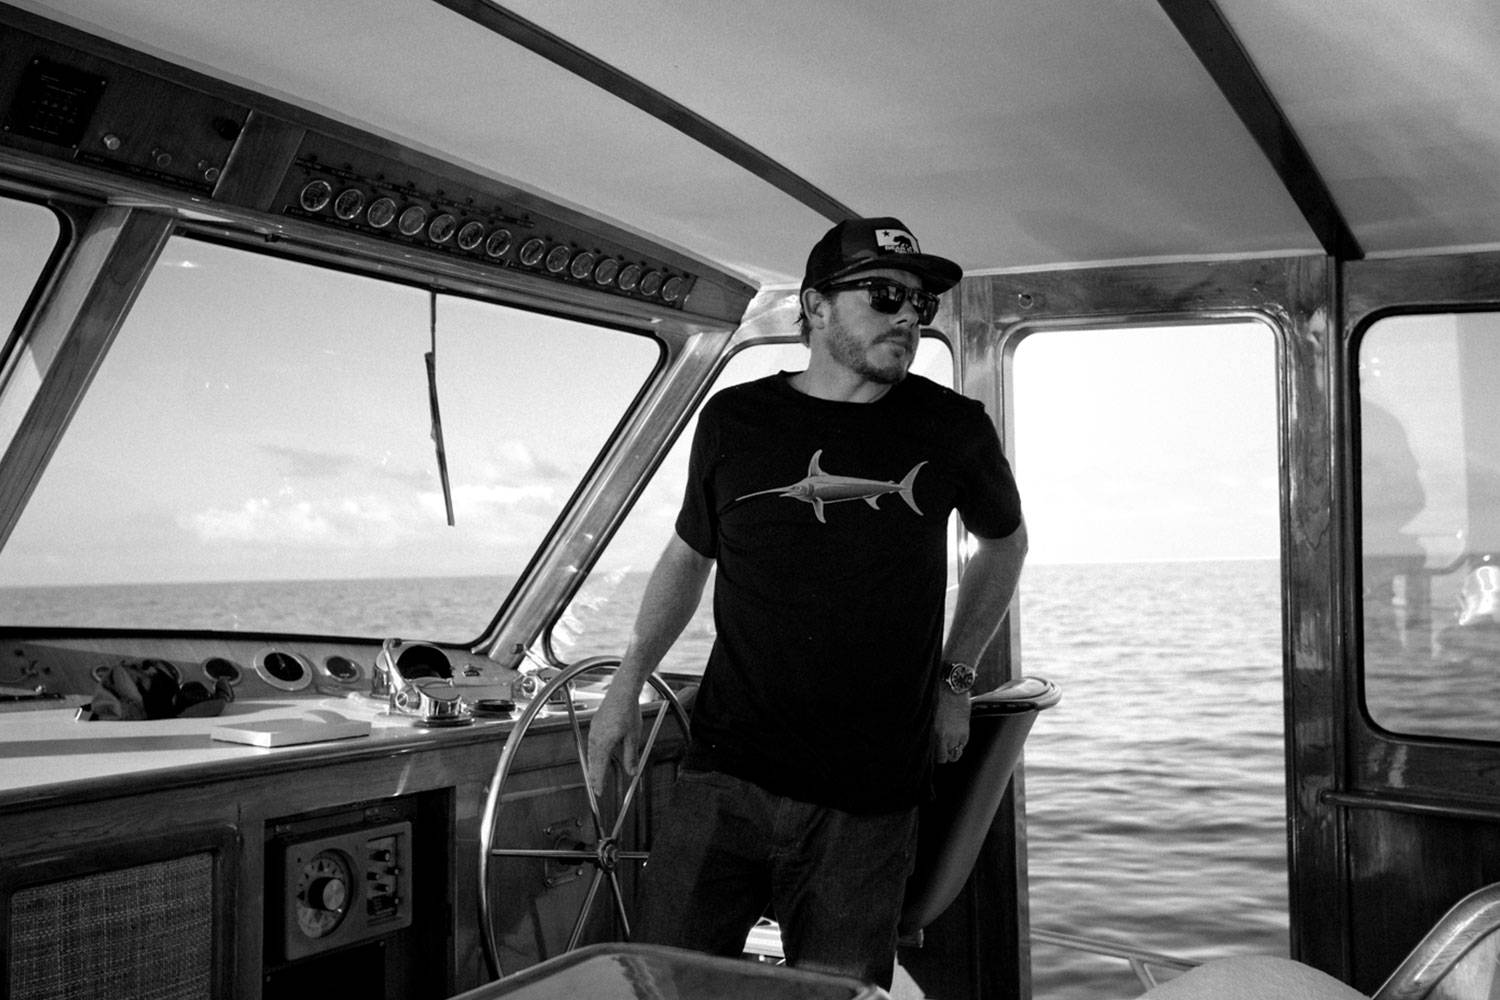 An Image of Thos Carson the owner on his boat.